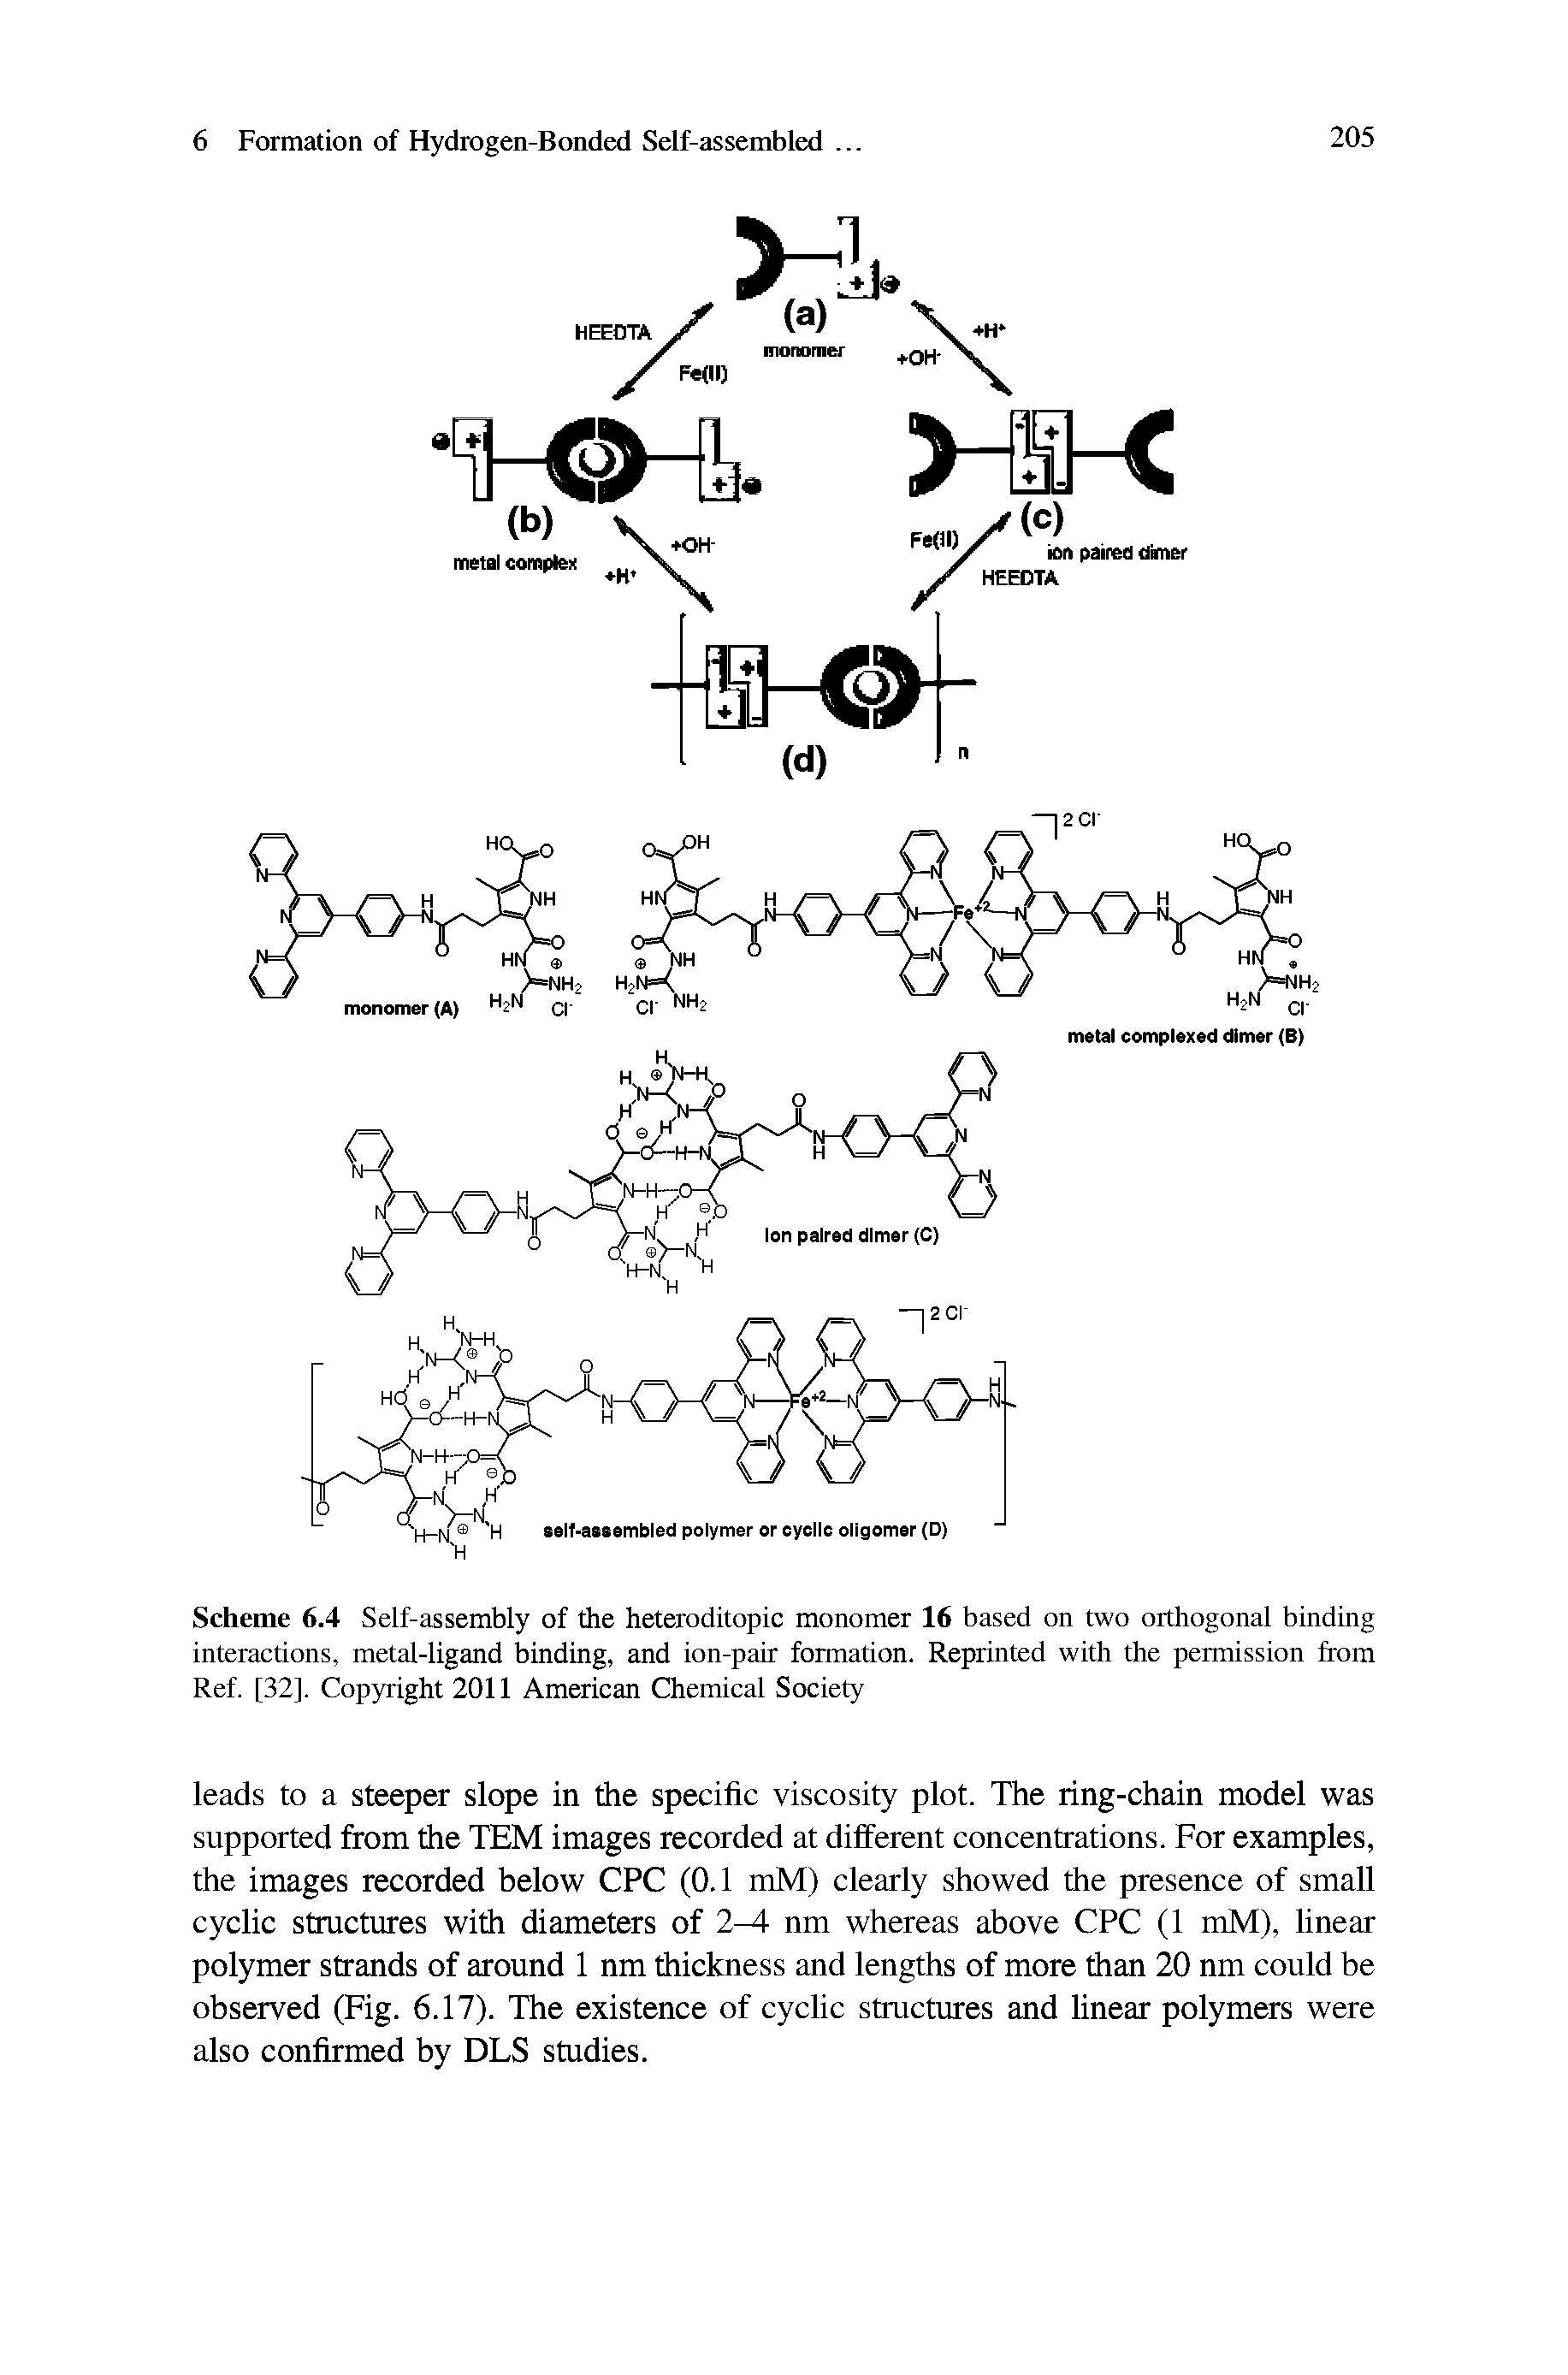 Scheme 6.4 Self-assembly of the heteroditopic monomer 16 based on two orthogonal binding interactions, metal-ligand binding, and ion-pair formation. Reprinted with the permission from Ref. [32]. Copyright 2011 American Chemical Society...